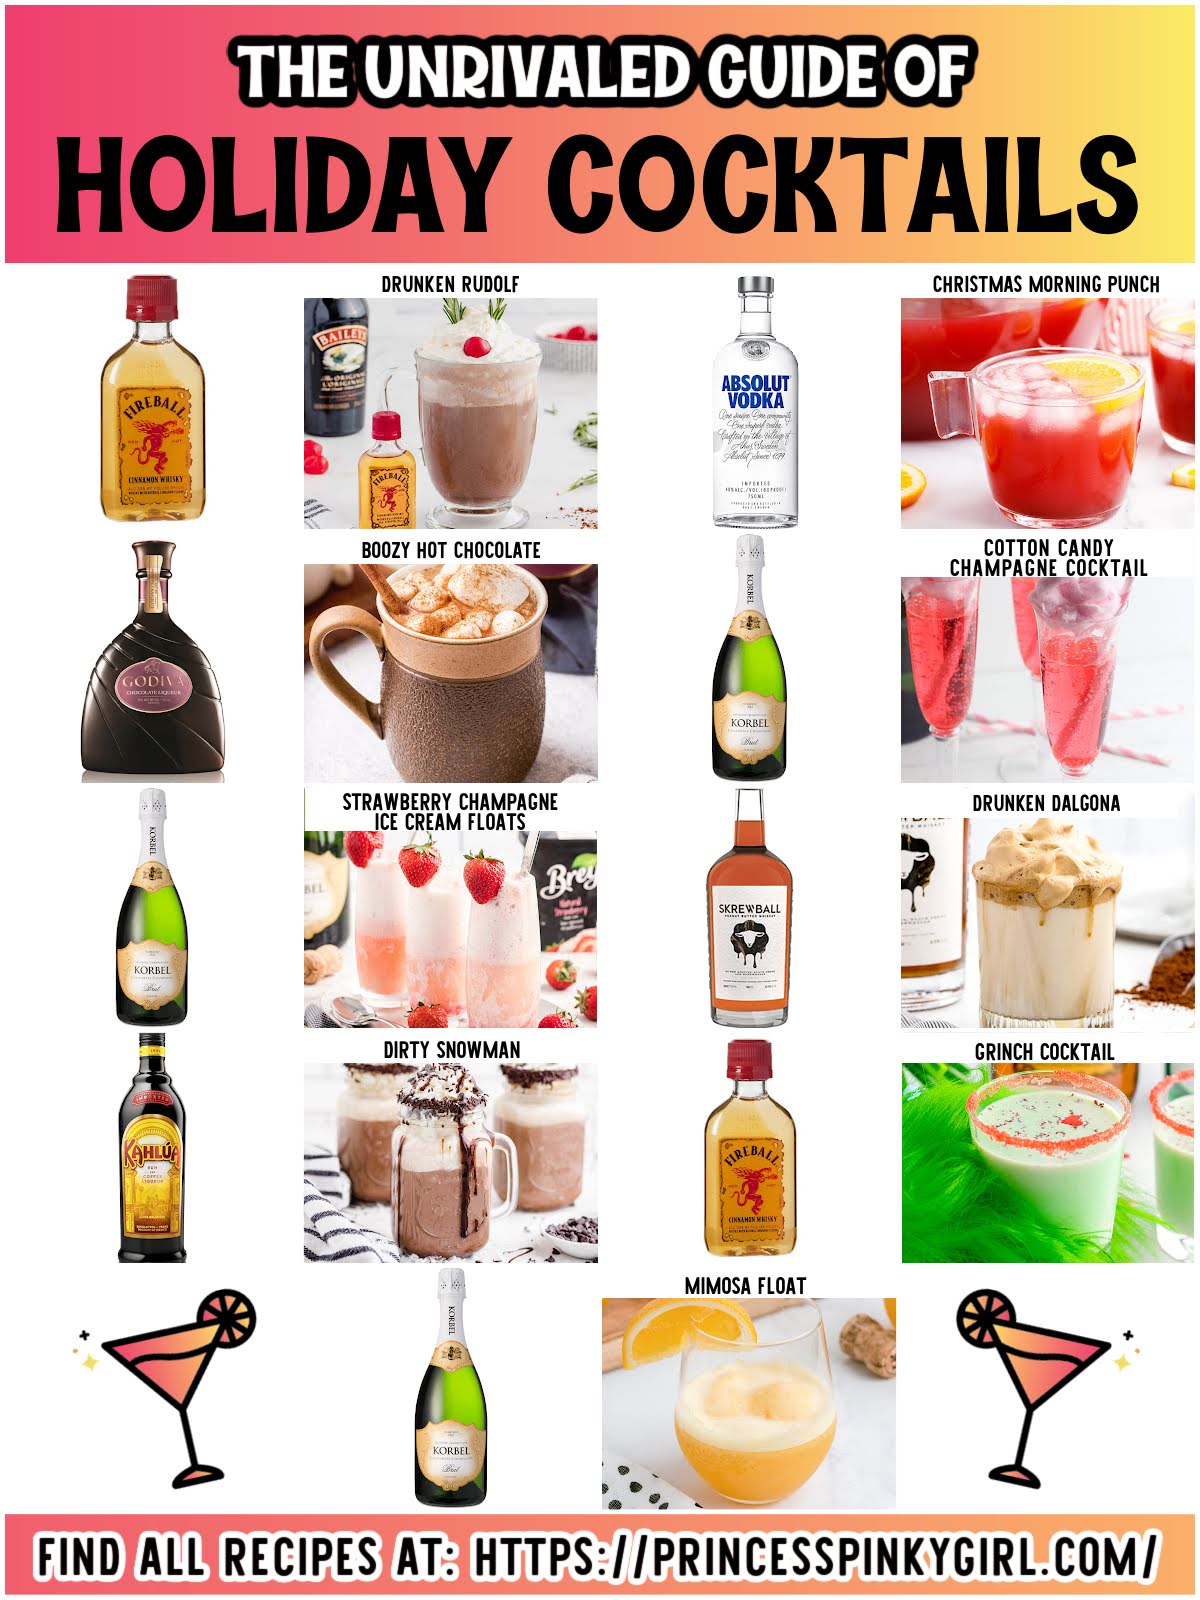 Holiday cocktails guide Facebook